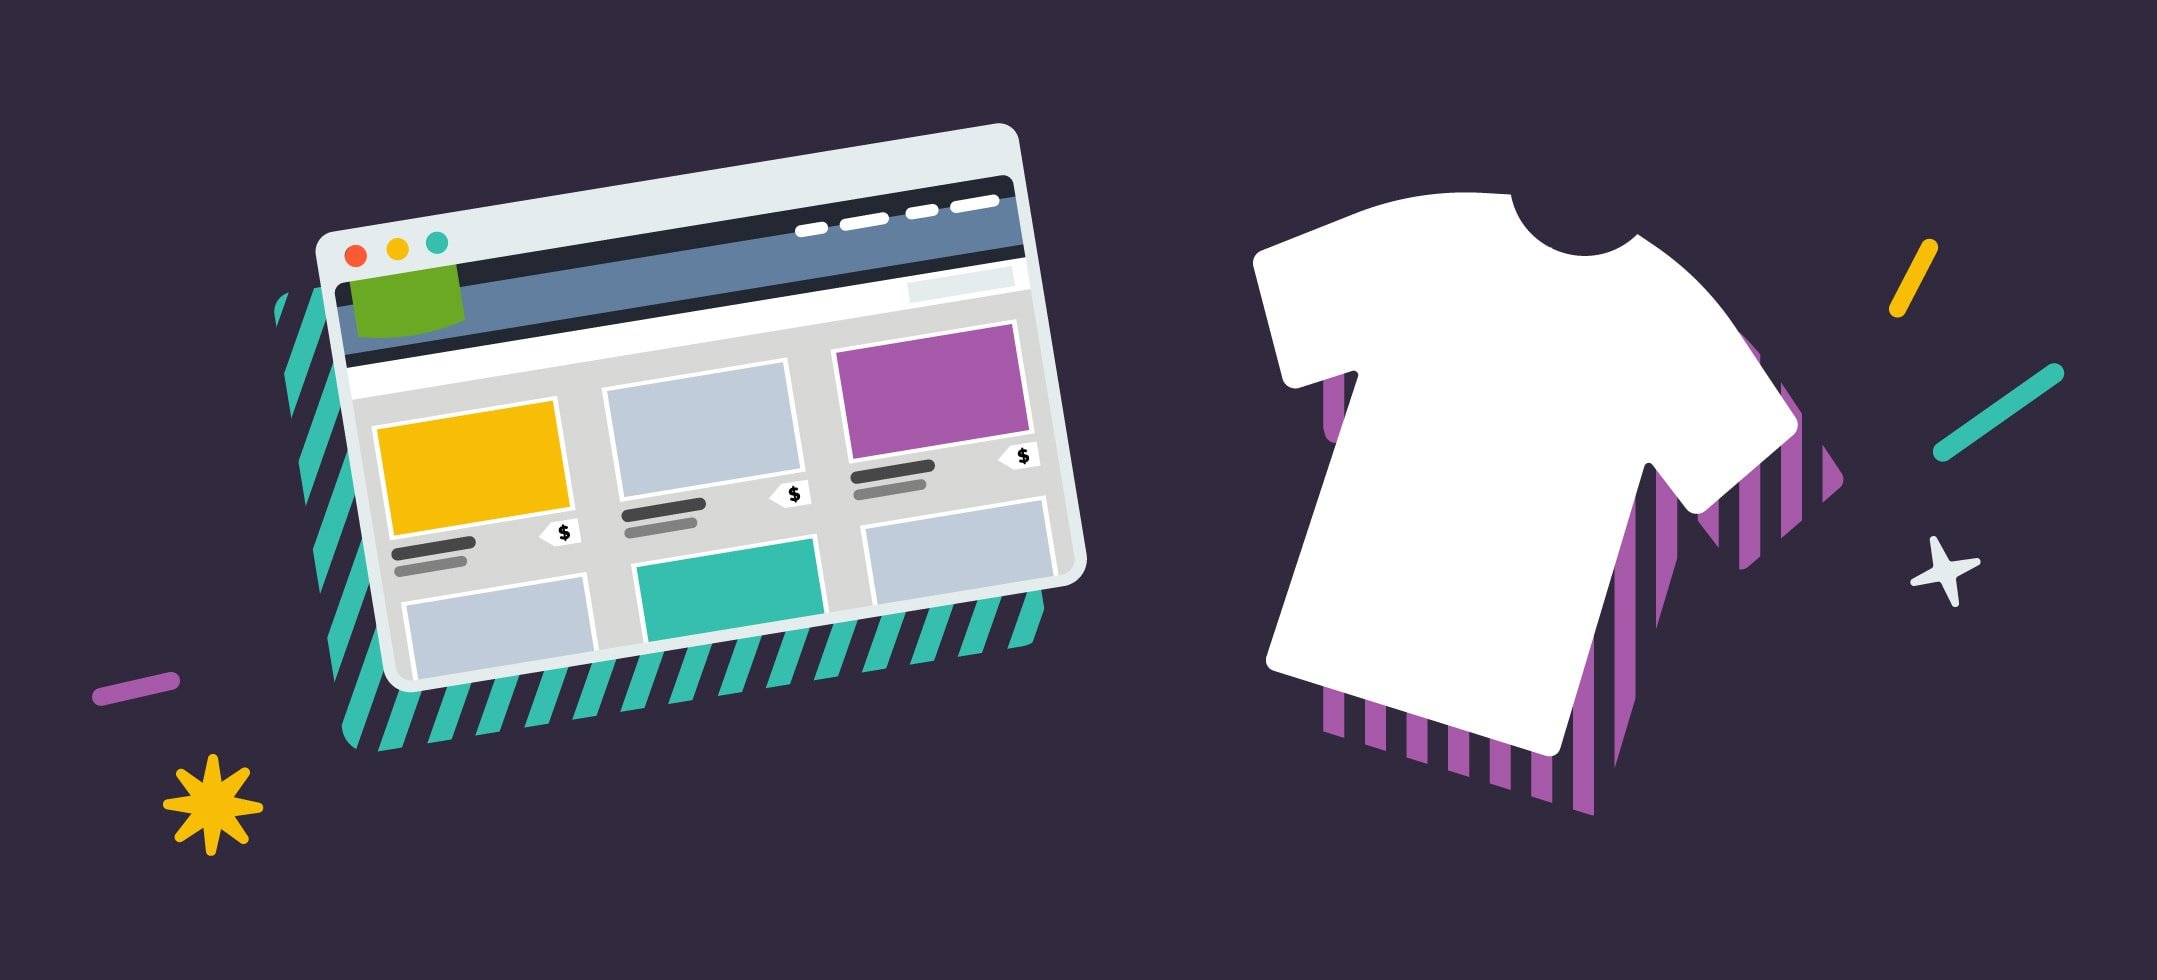 How to Make Your Own T-Shirt Designs Using Creative Market